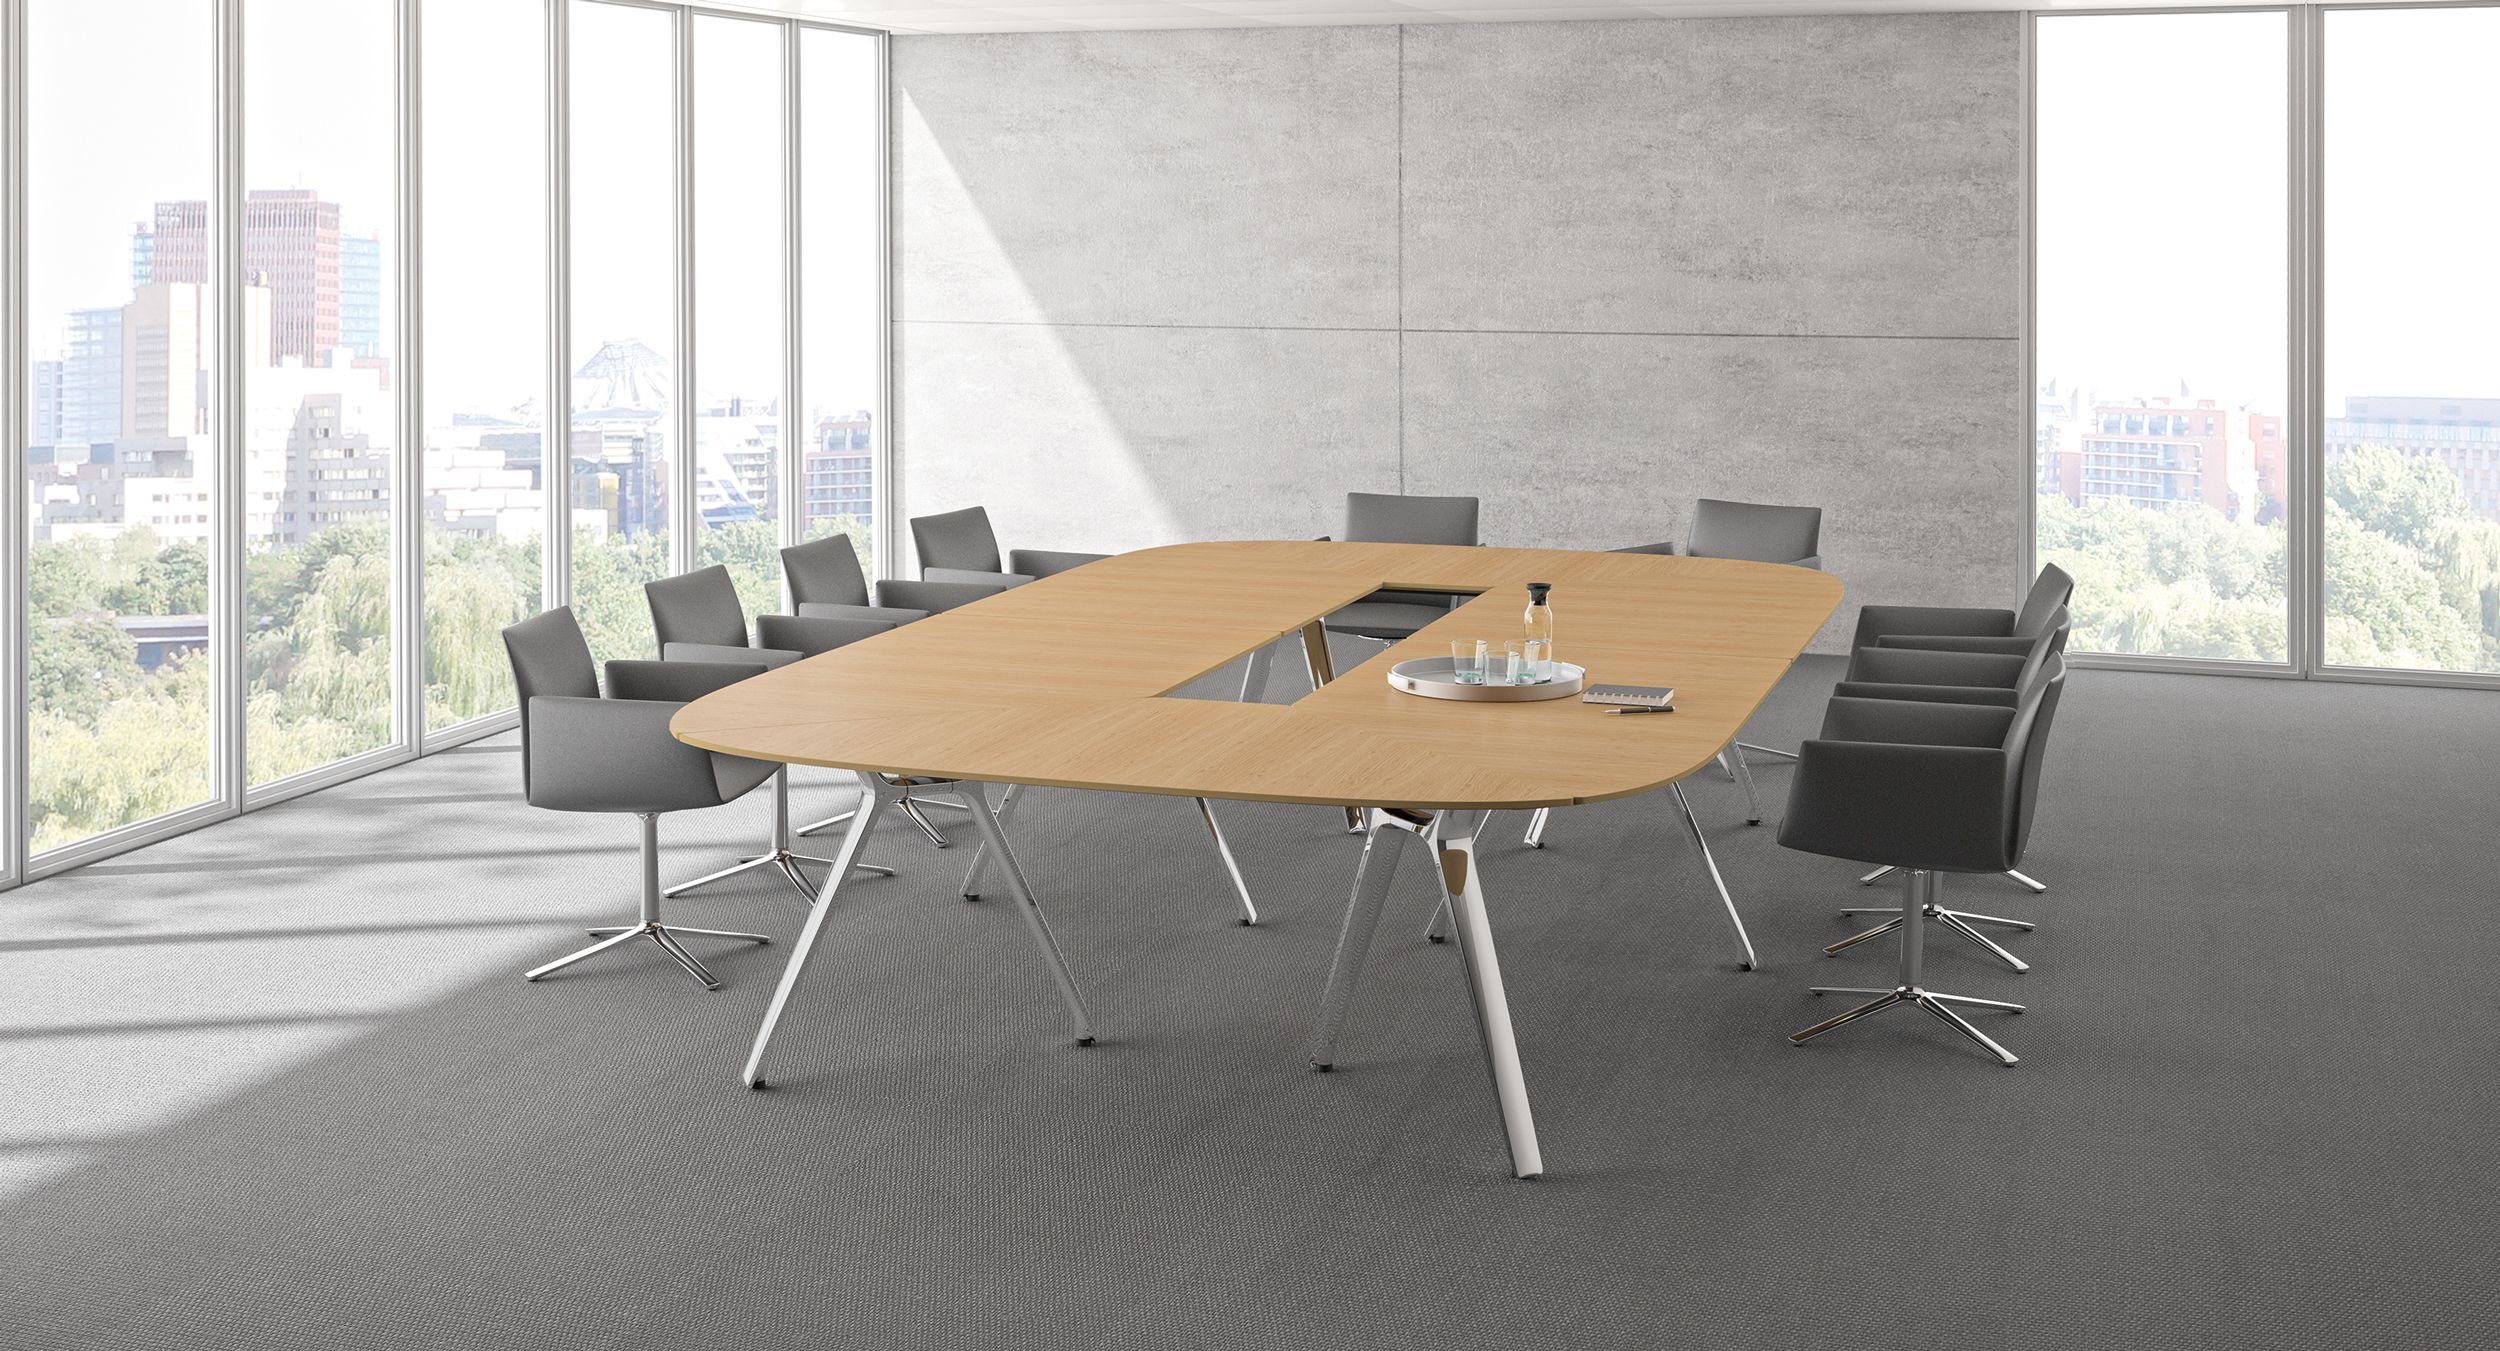 Stratos pairs modern, timeless design with a flexible, parametric system to create table solutions of any size and shape.